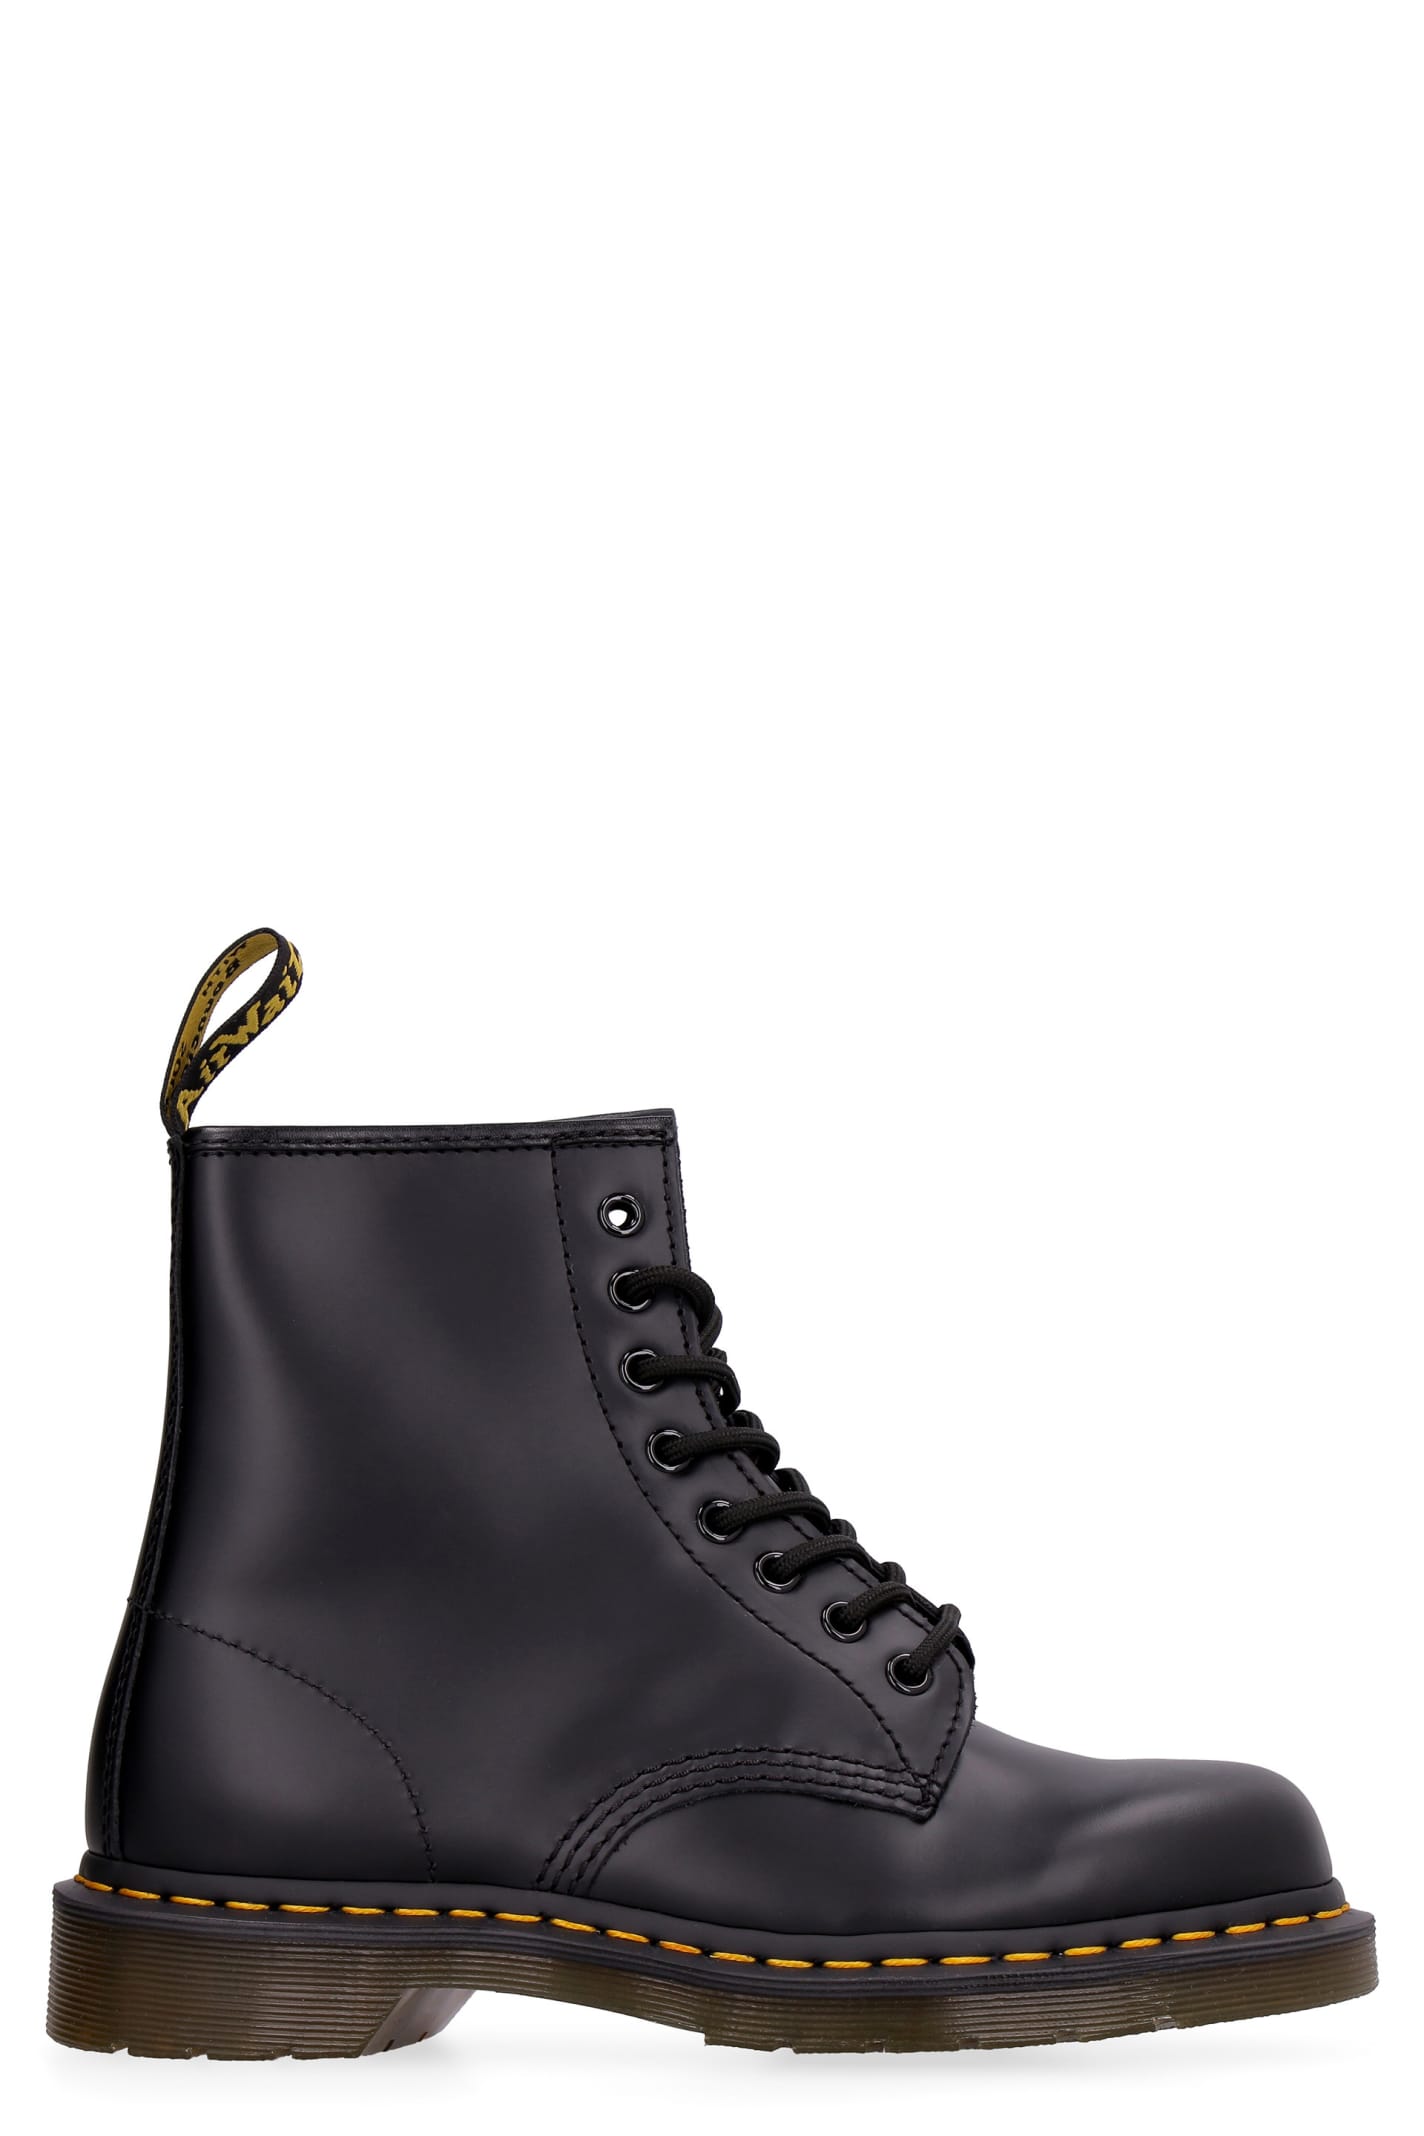 Buy Dr. Martens 1460 Leather Combat Boots online, shop Dr. Martens shoes with free shipping